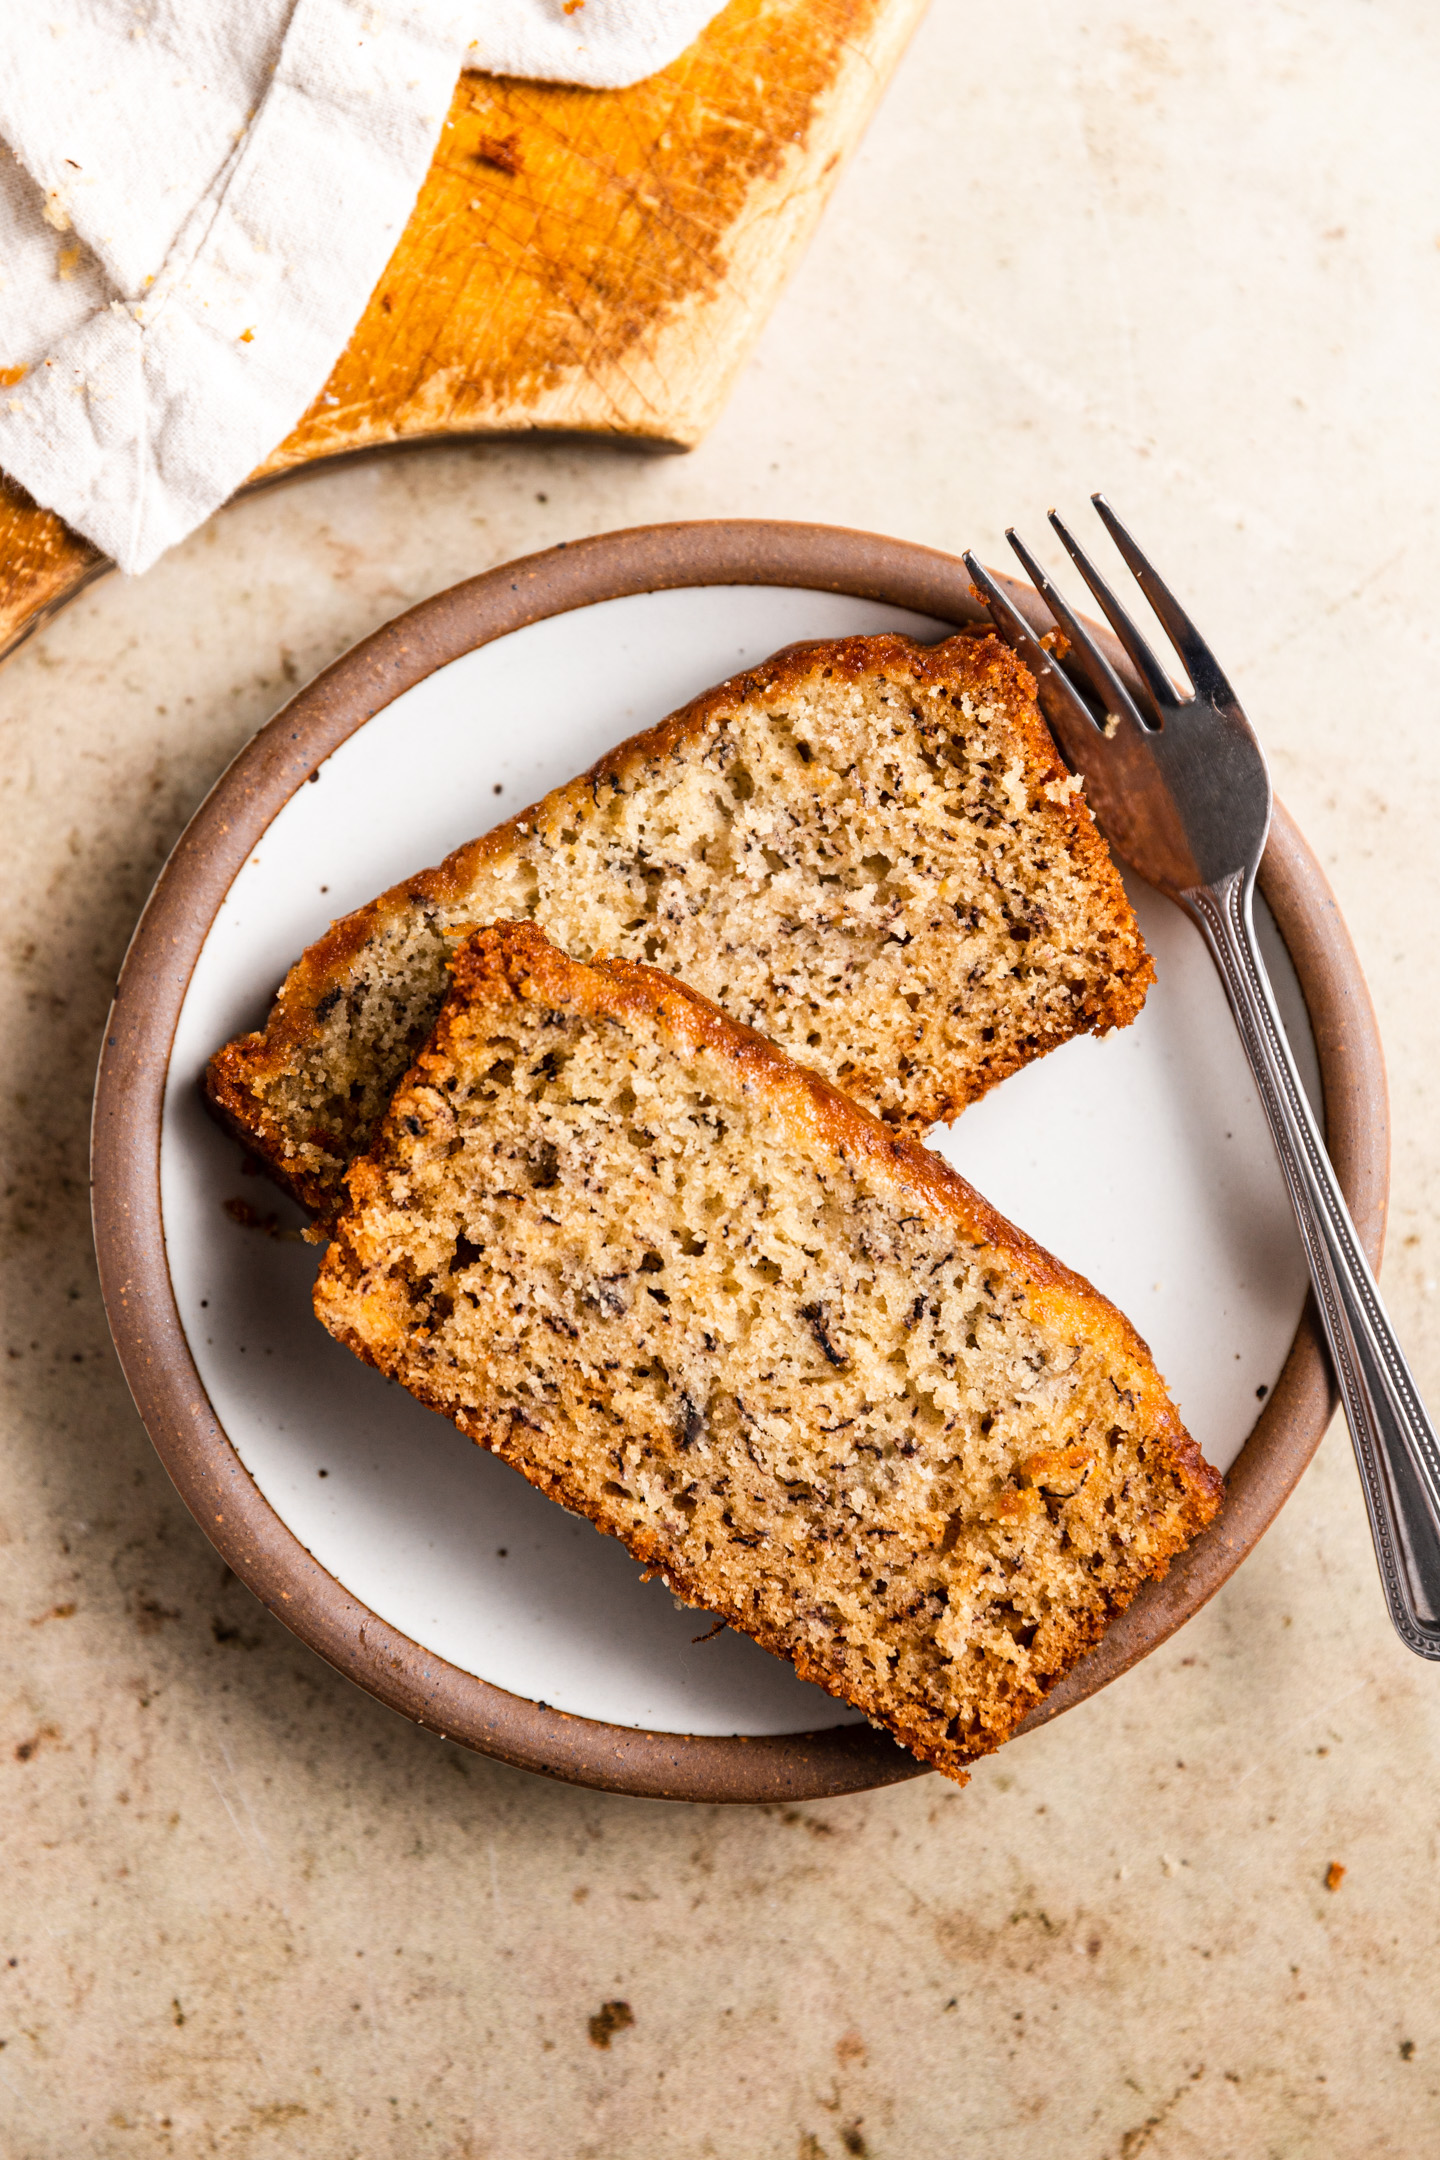 Two slices of banana bread on a plate next to a fork.